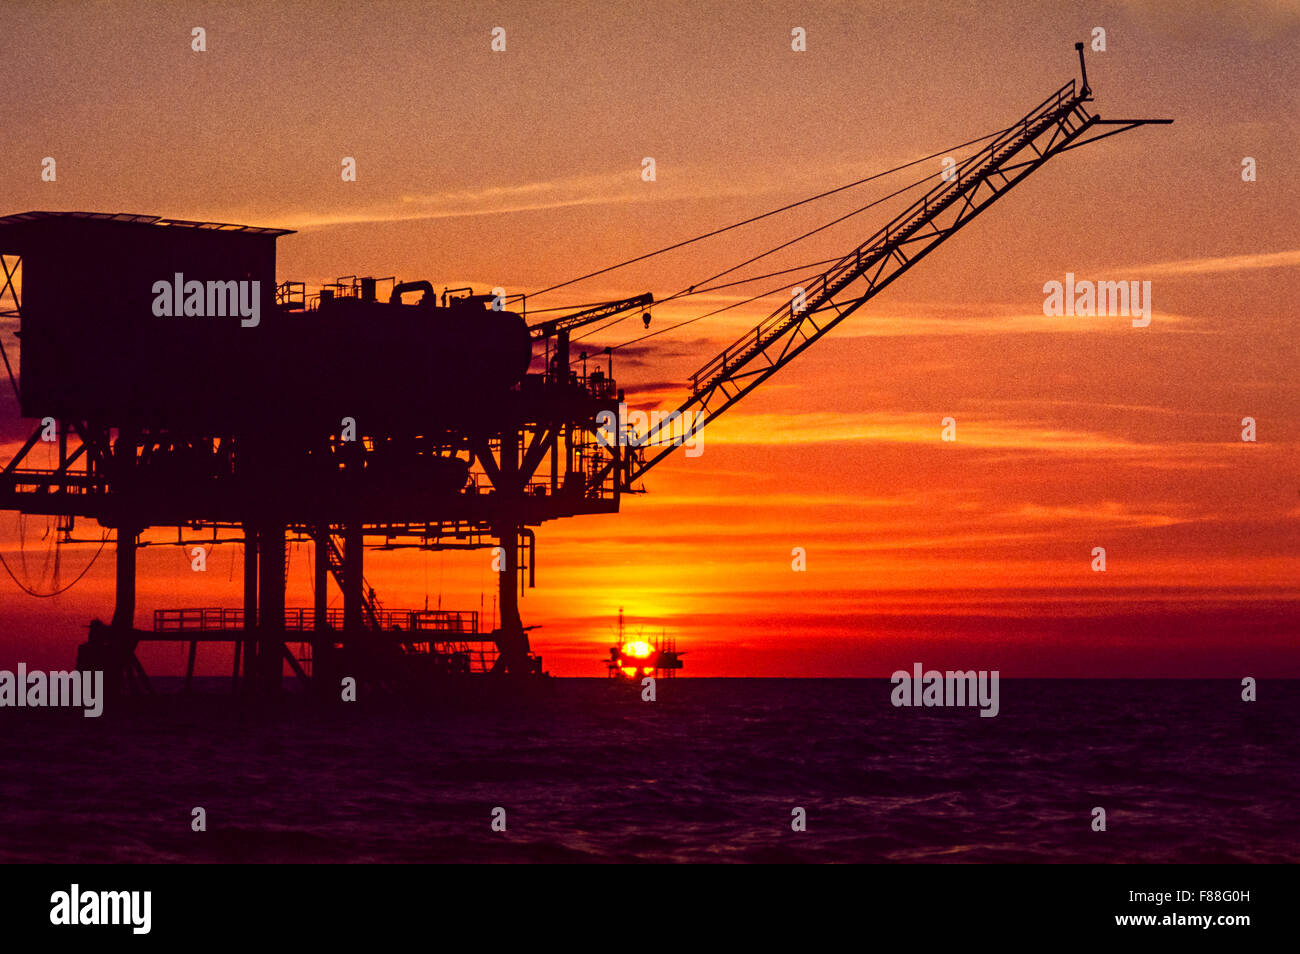 Offshore oil drilling rig with rising sun, Philippines, South East Asia Stock Photo